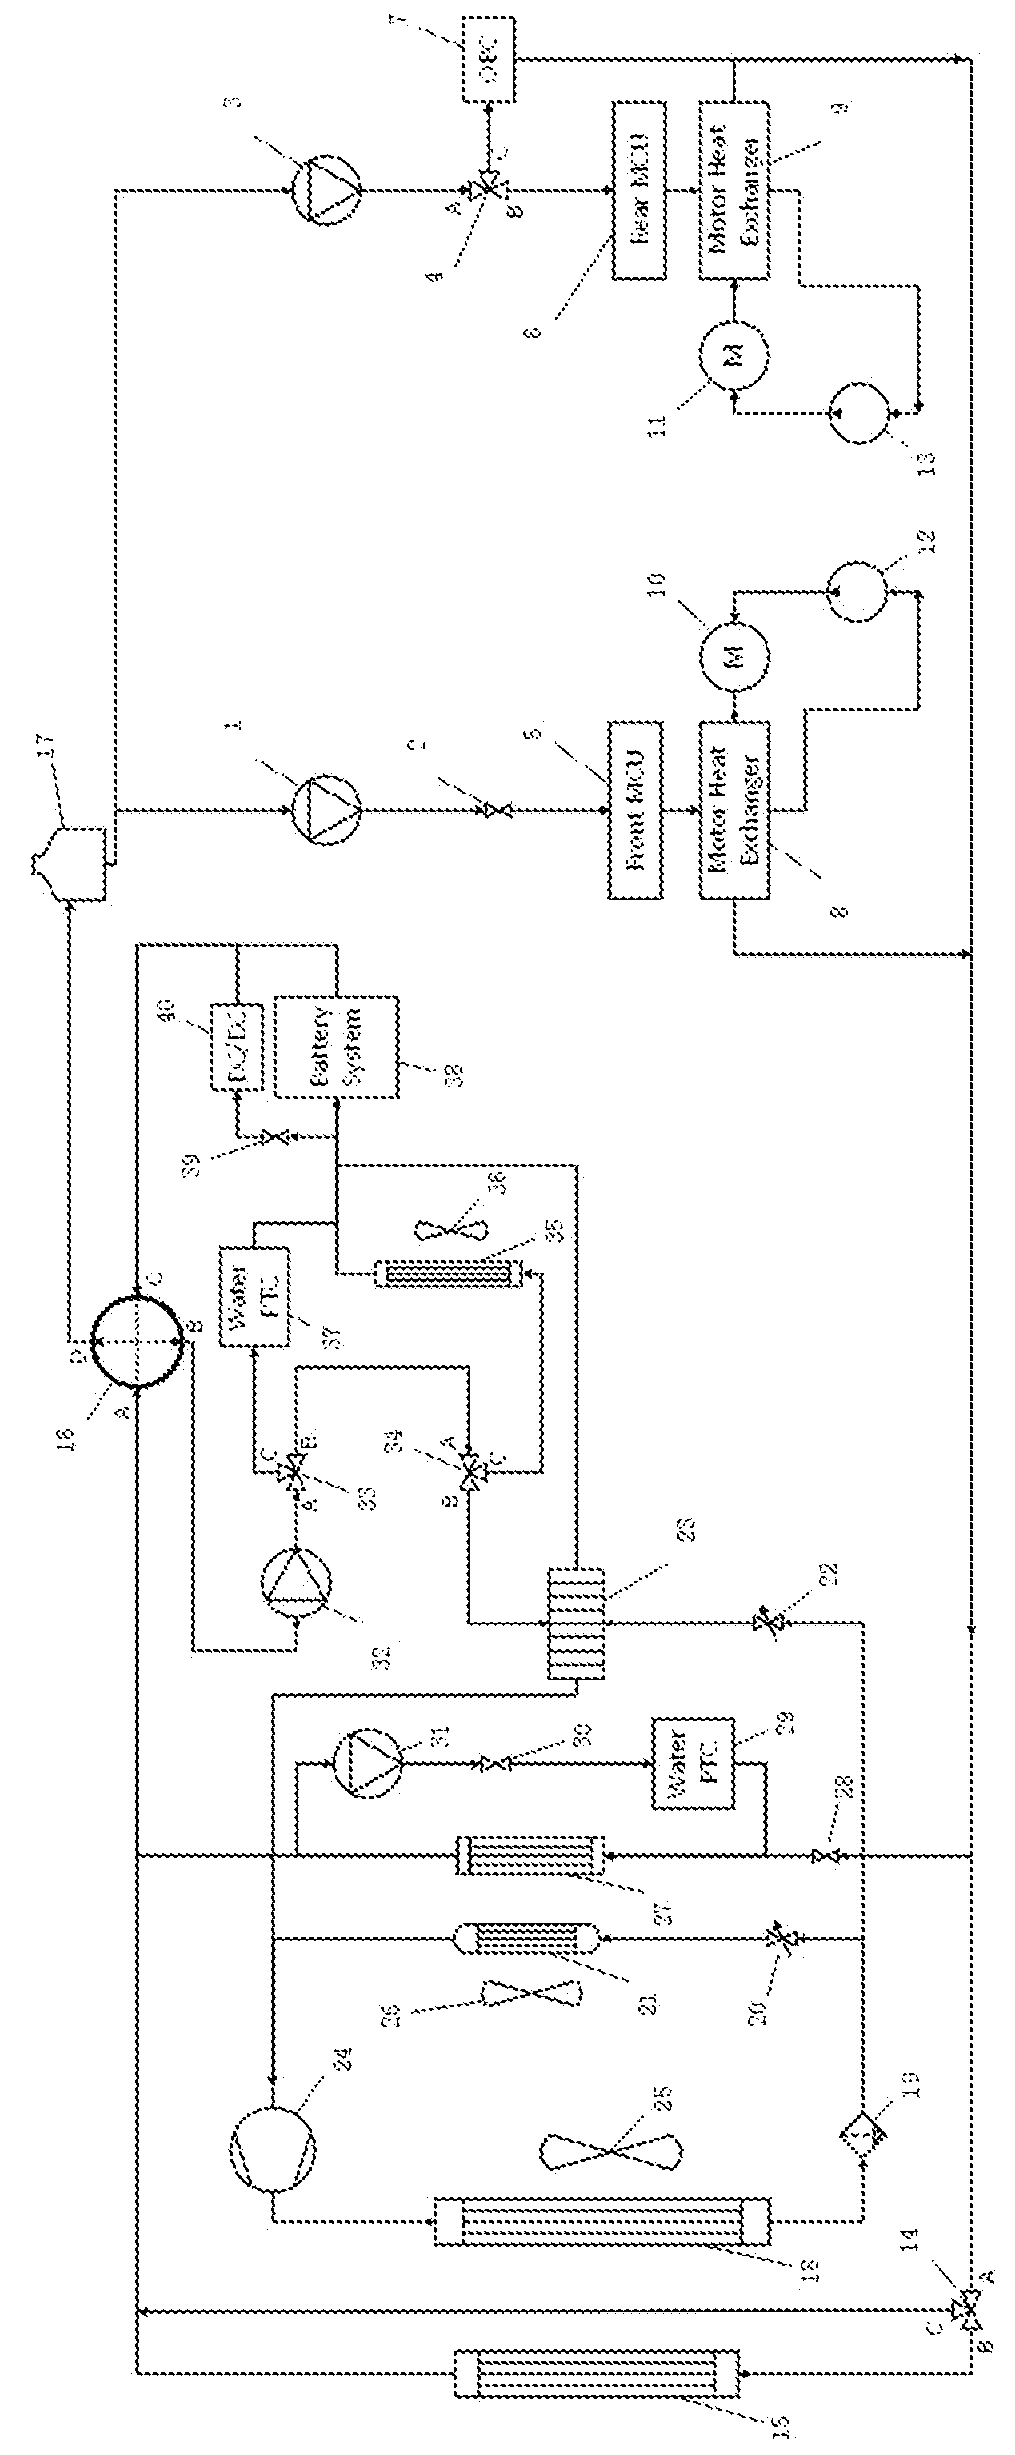 Intelligent multi-loop thermal management system for an electric vehicle